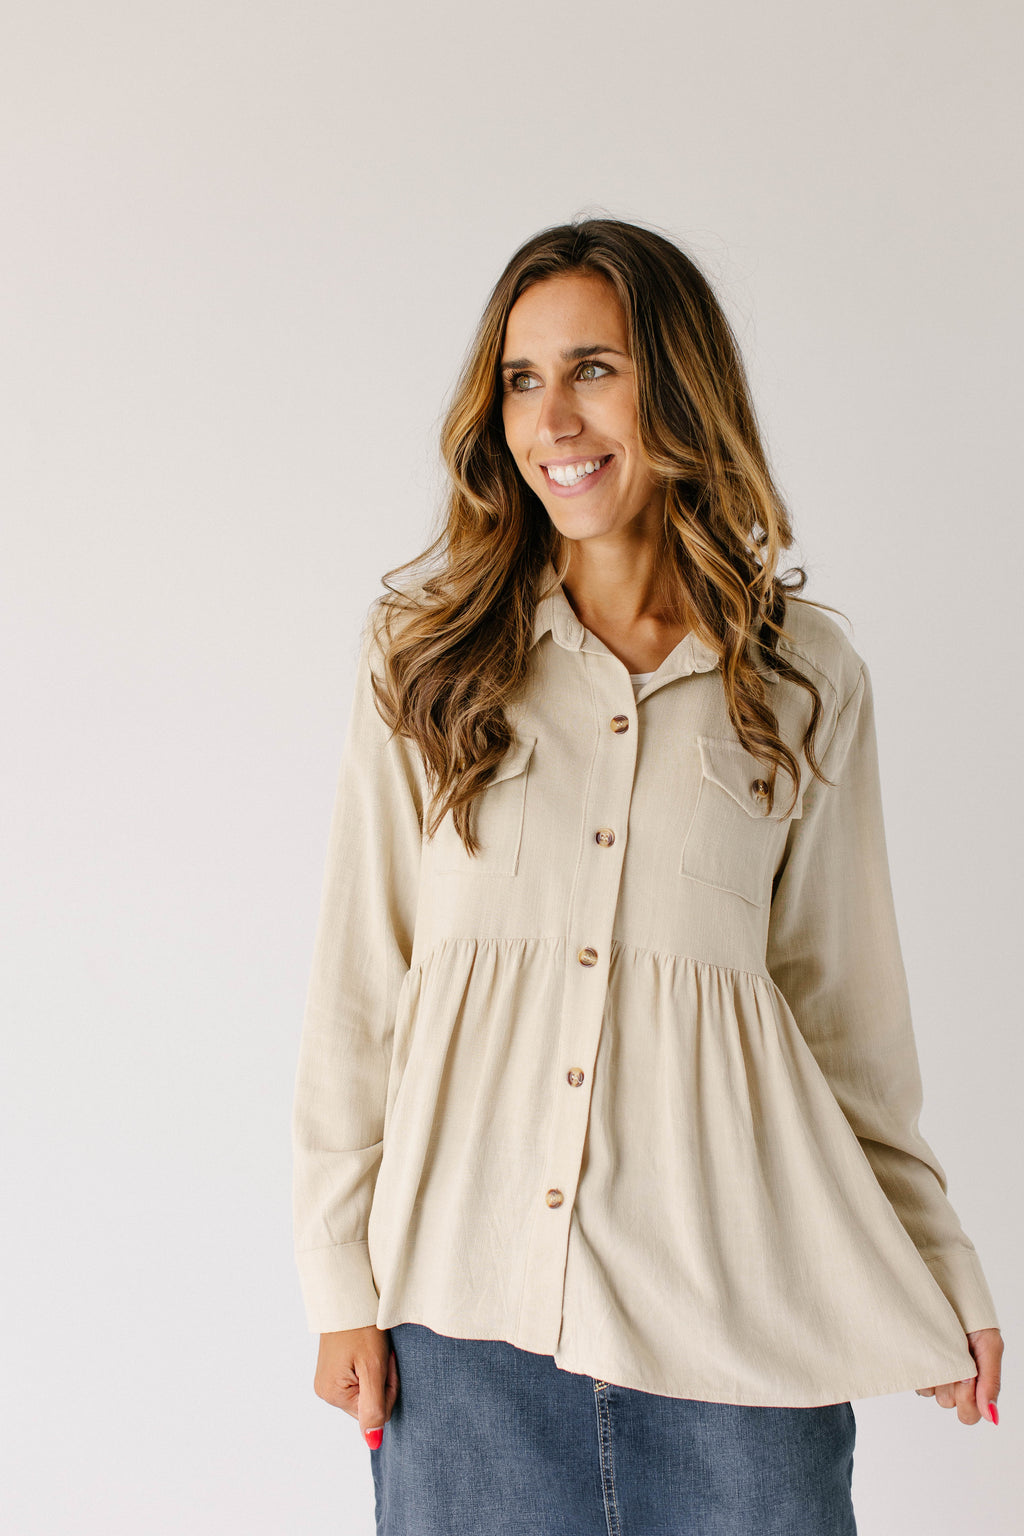 'Dawson' Peplum Collared Button Up Top in Taupe